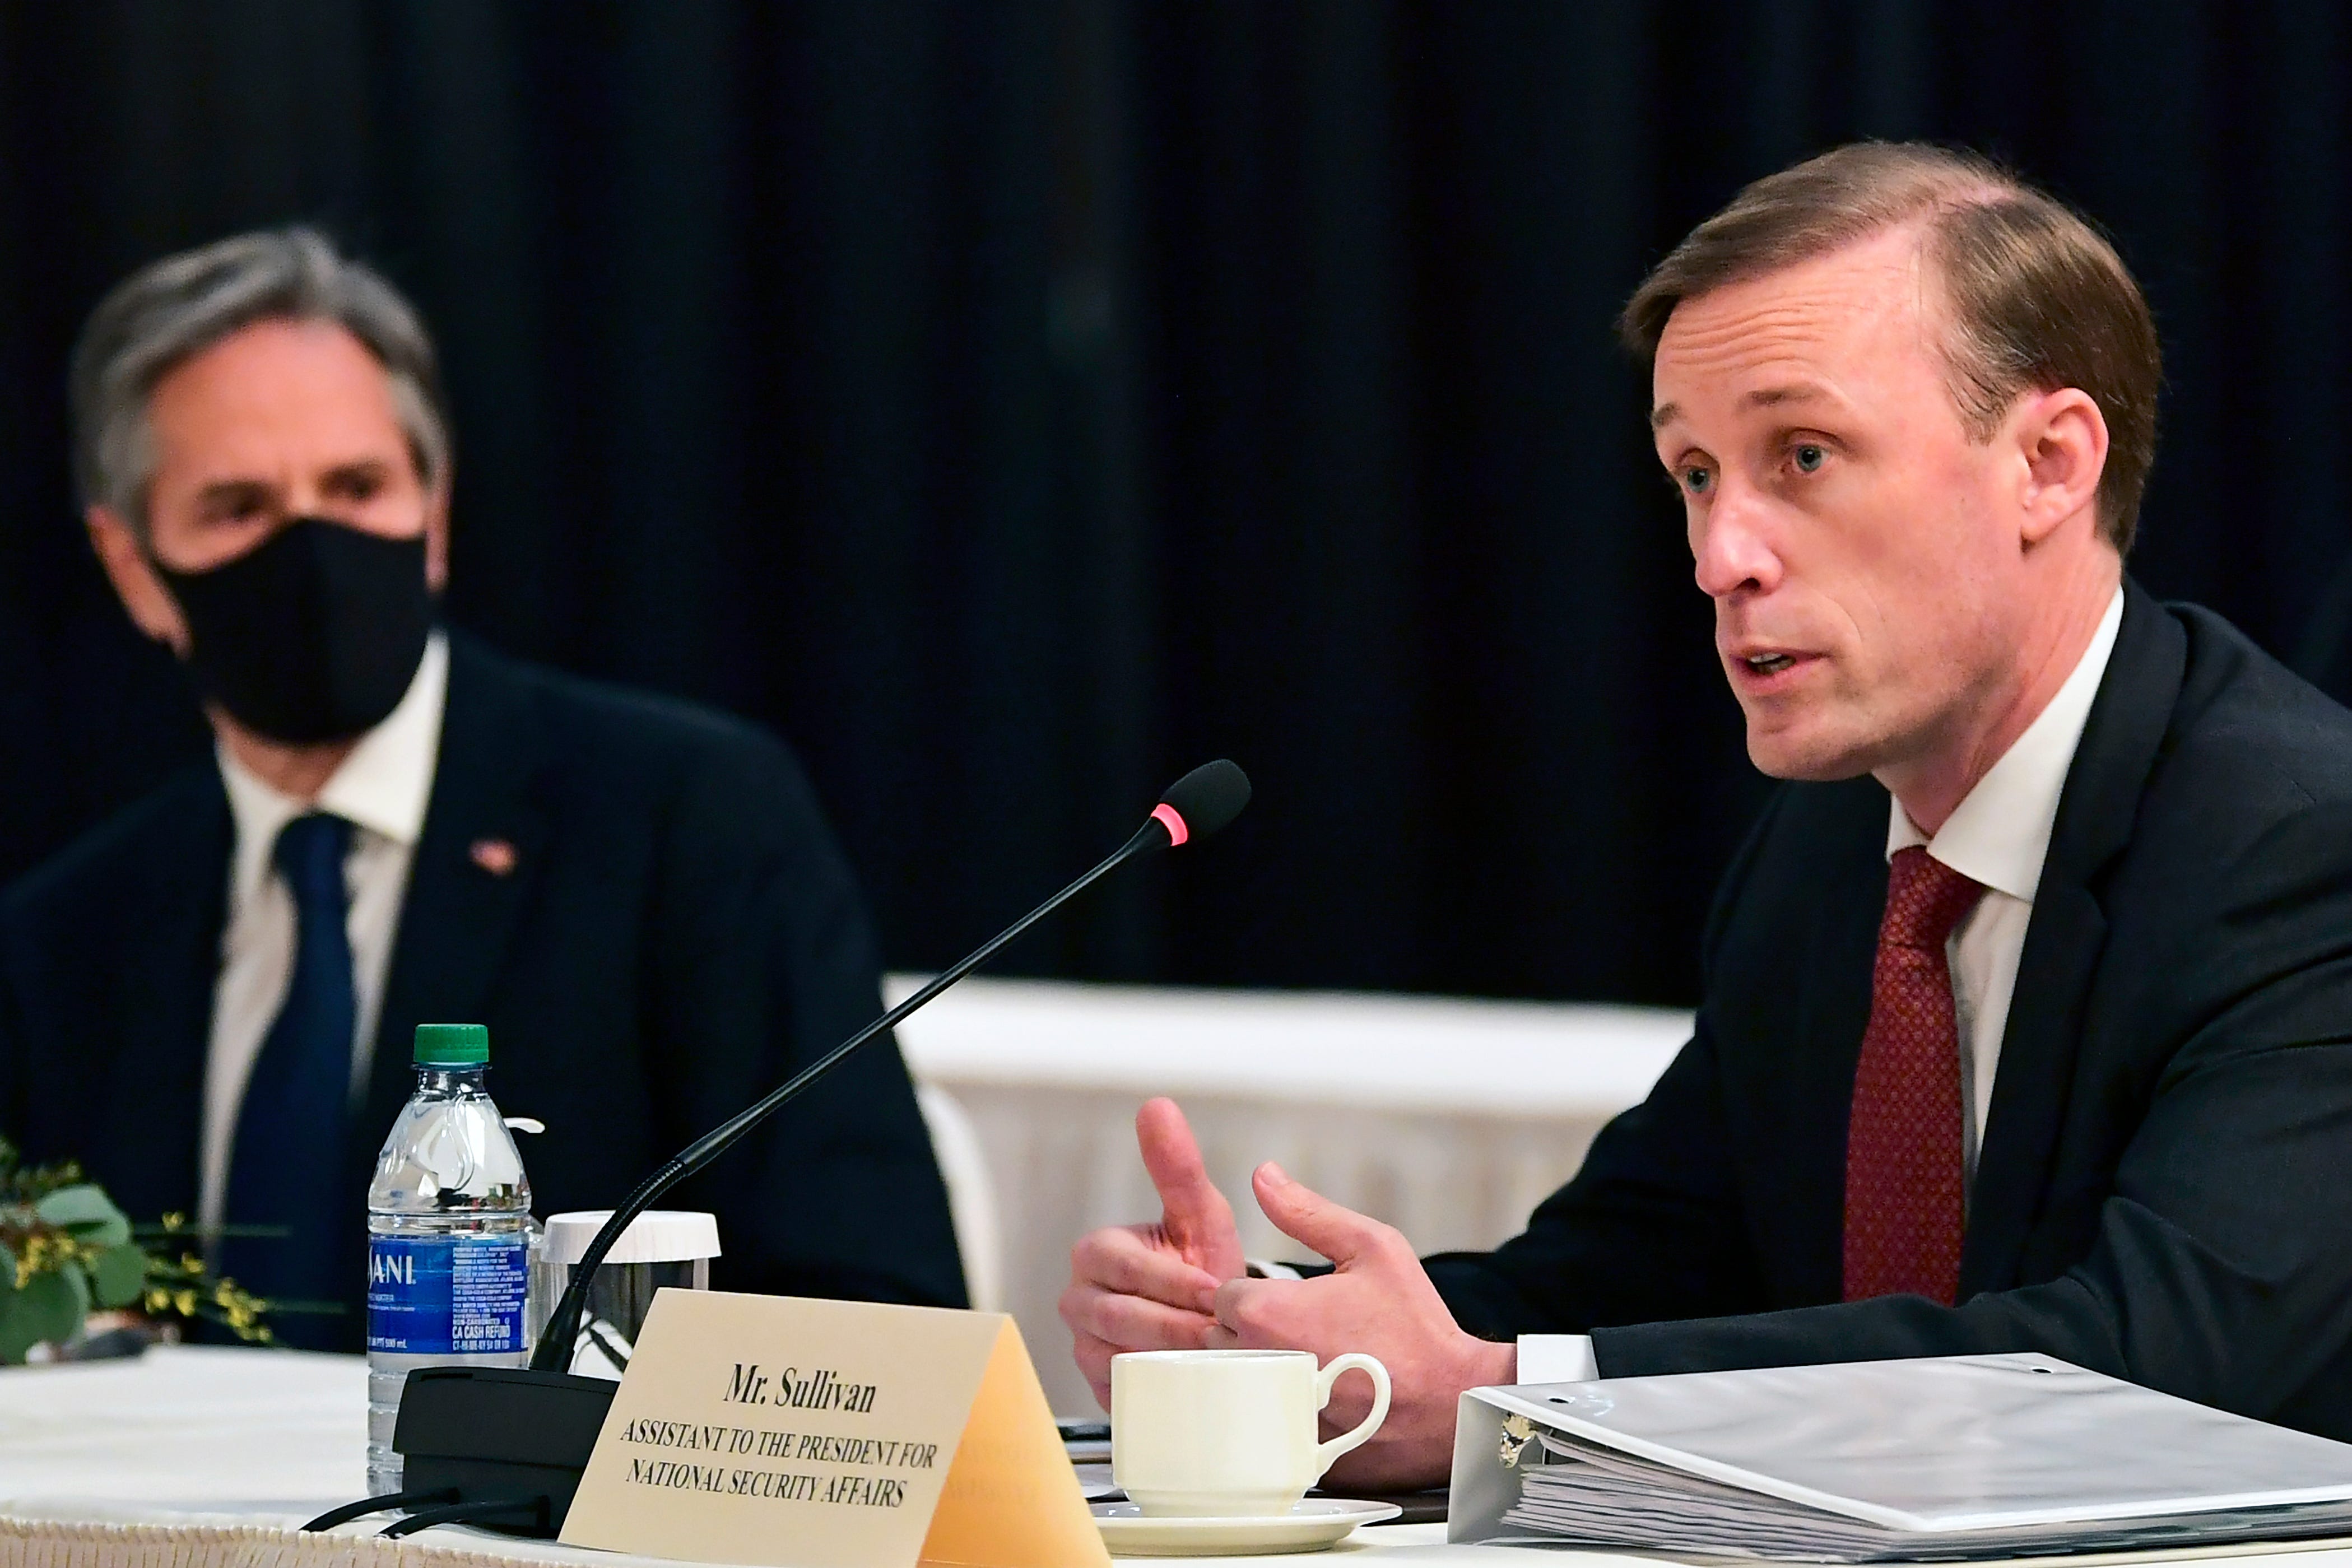 Secretary of State Antony Blinken, left, listens as White House national security adviser Jake Sullivan, right, speaks at the opening session of U.S.-China talks at the Captain Cook Hotel in Anchorage, Alaska, on March 18.